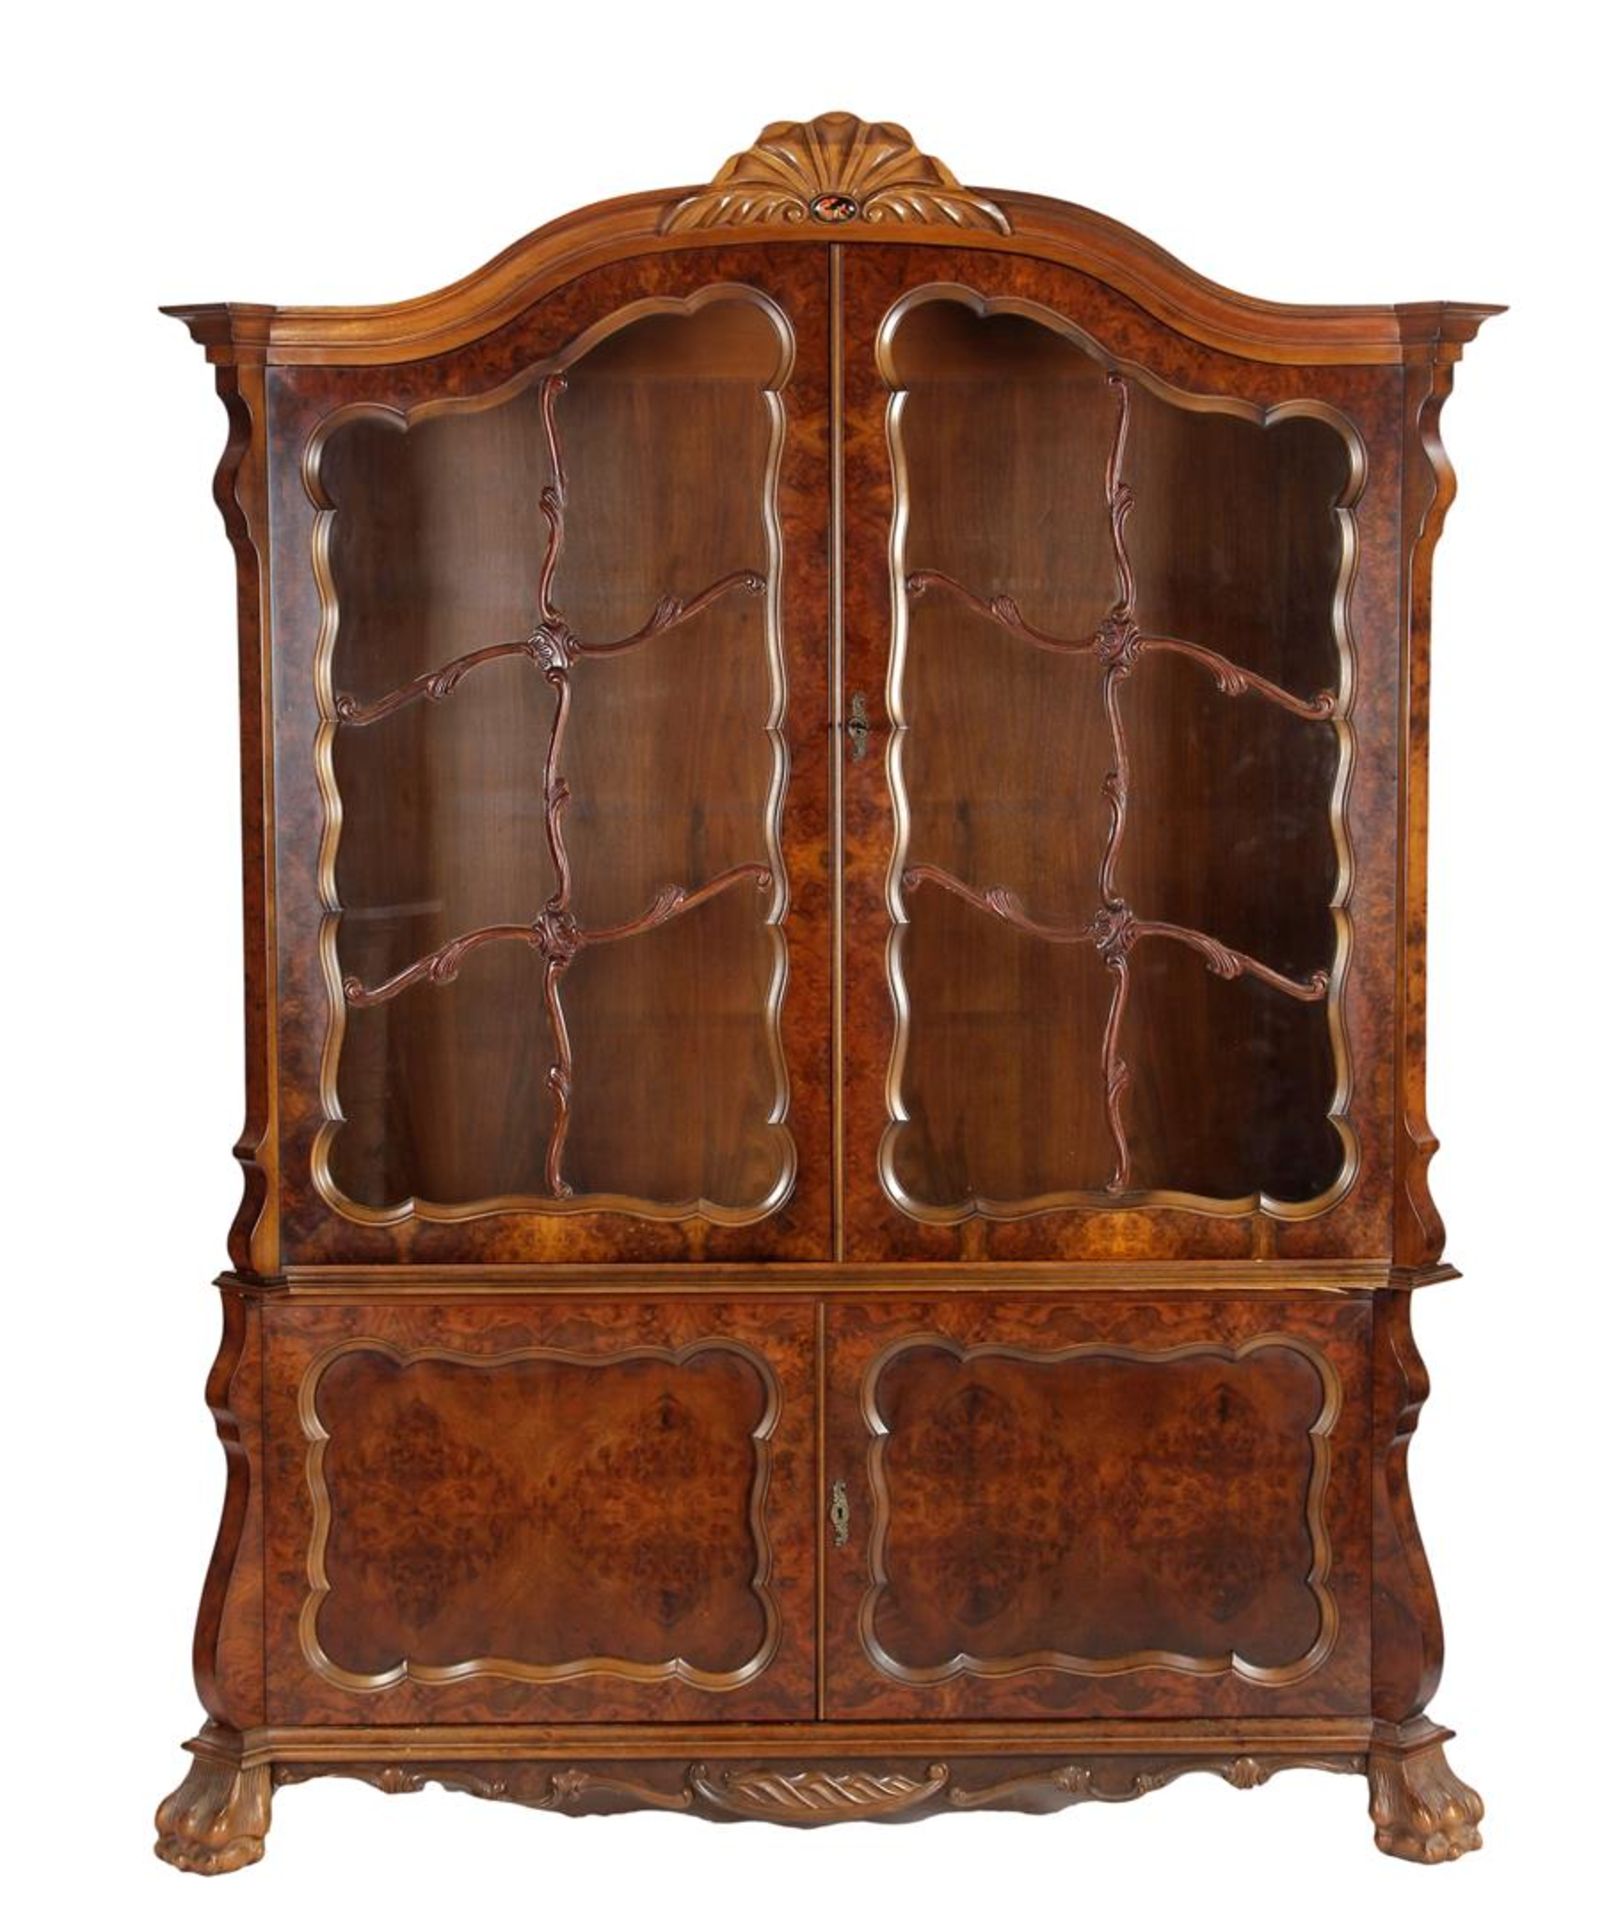 Walnut and burr walnut veneer 2-piece display cabinet with contoured hood rail with rocaille